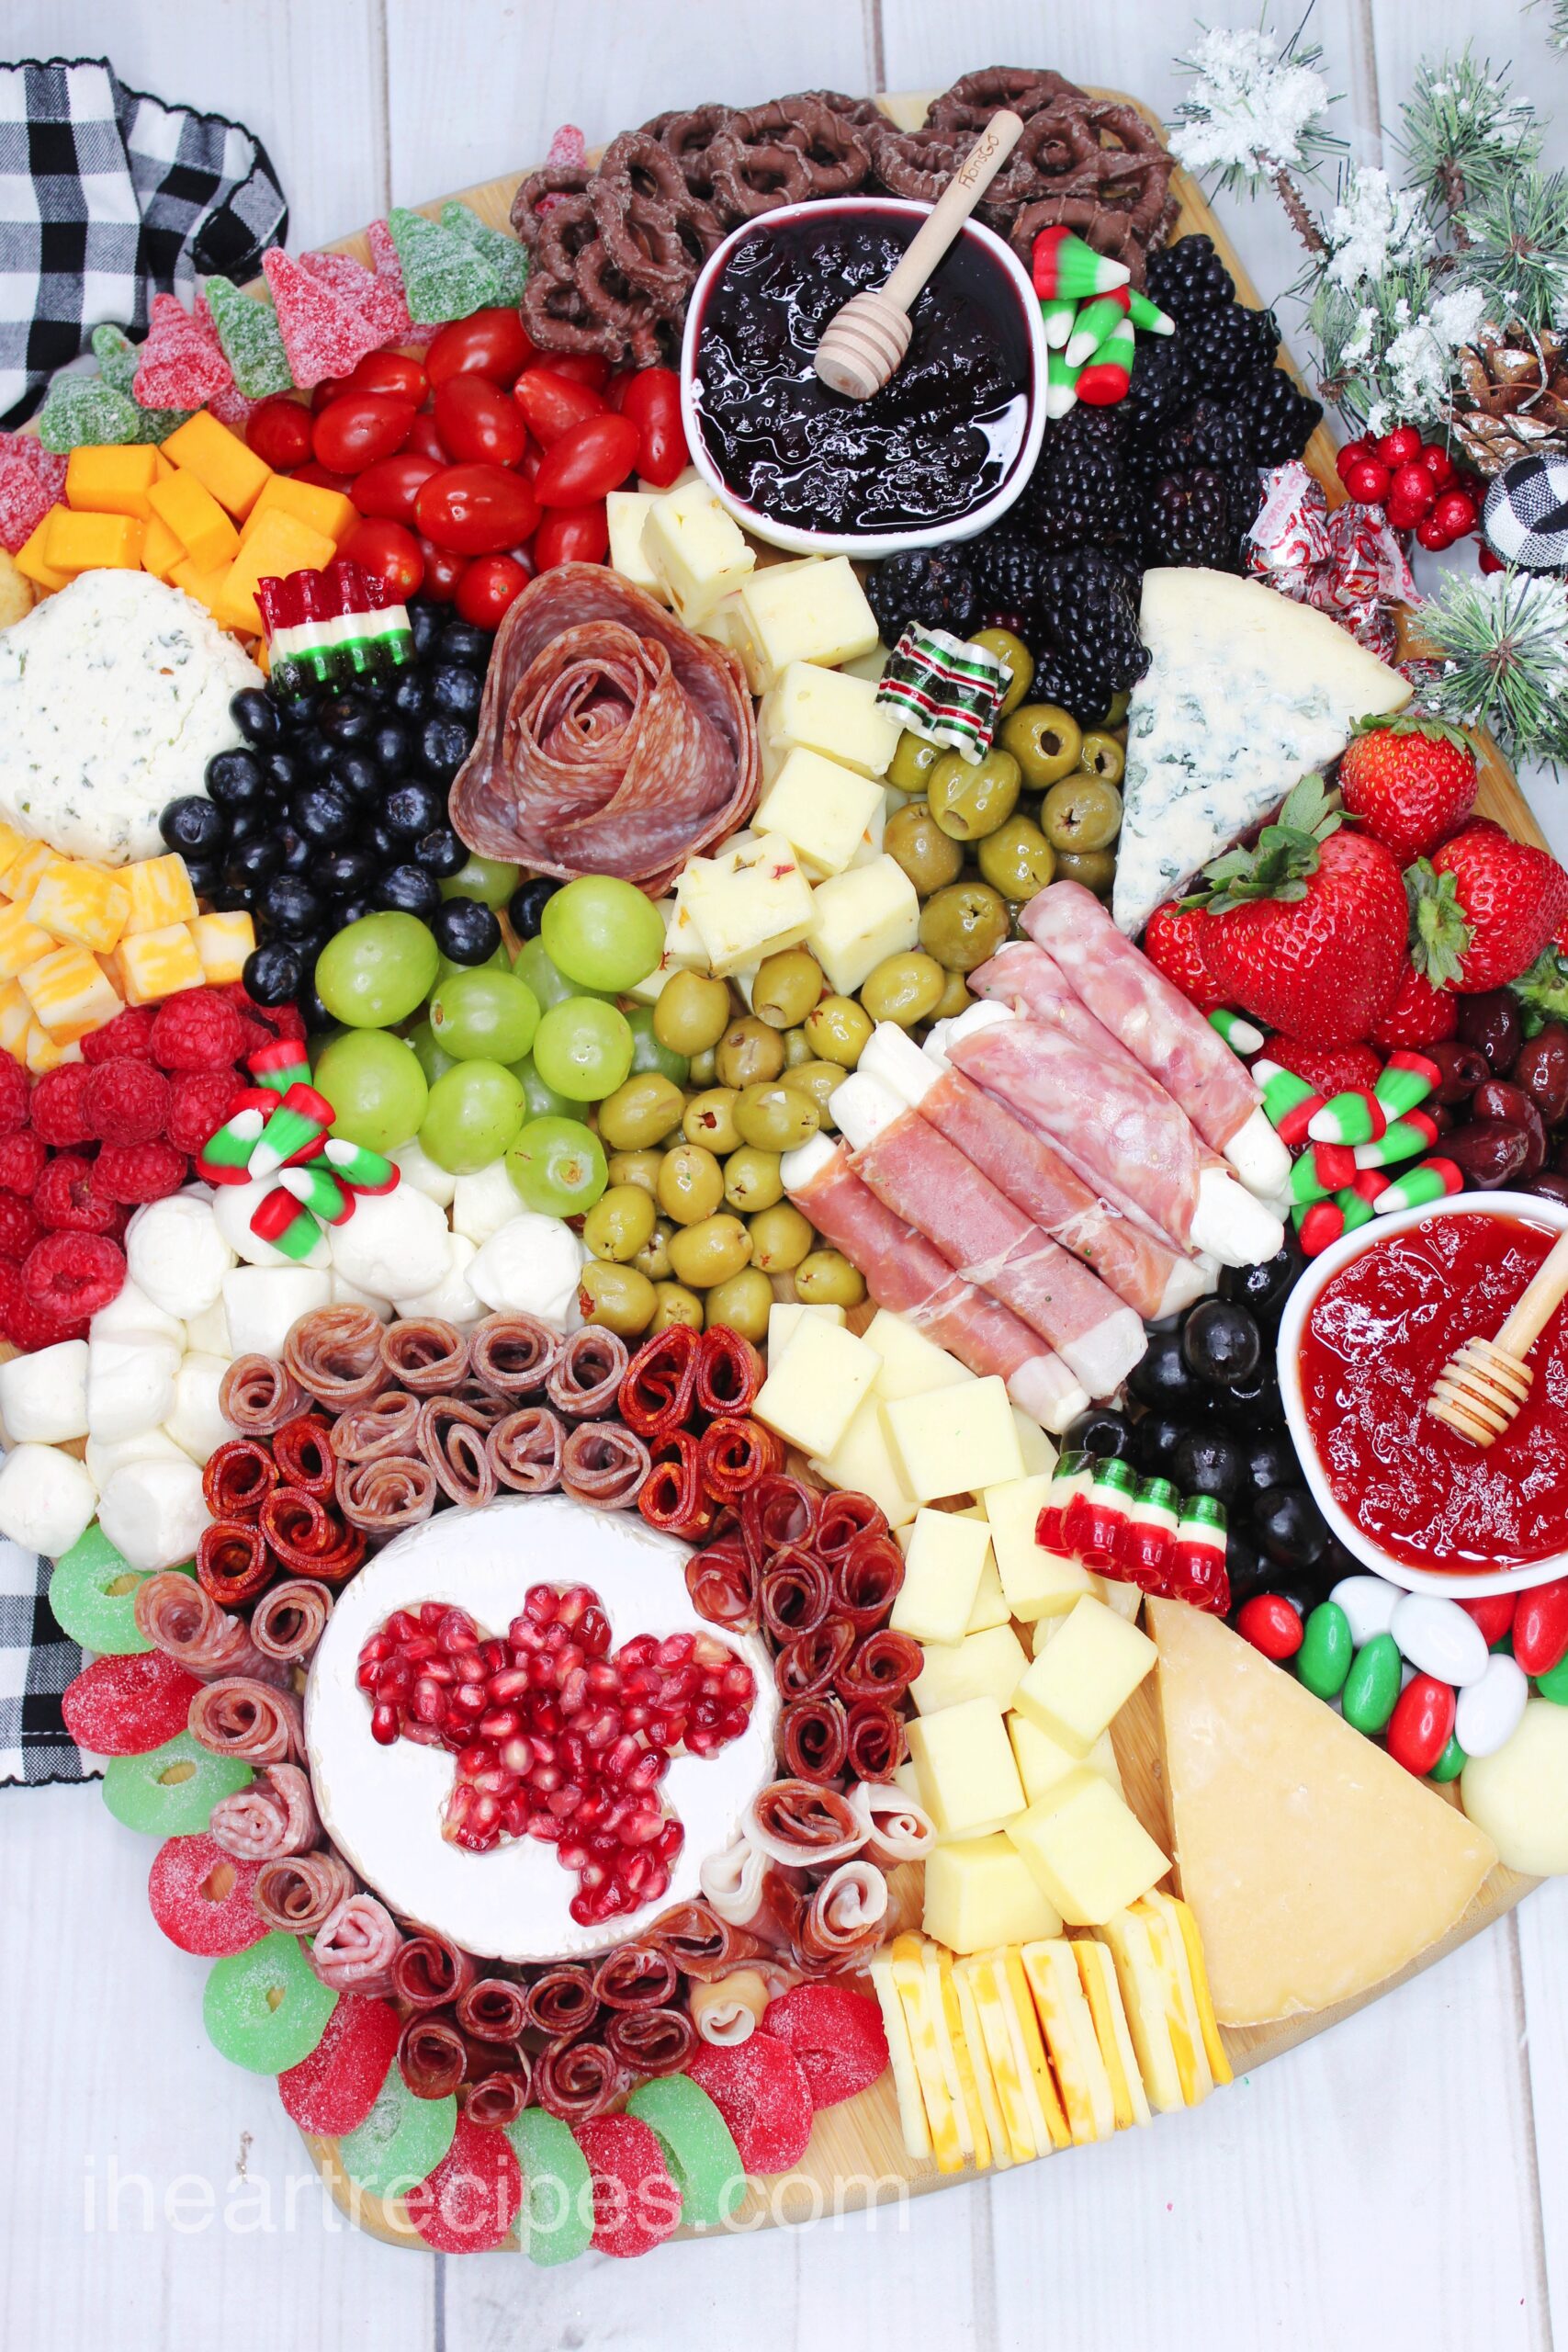 An overhead image of a full Charcuterie Board, packed with a variety of meats, cheeses, fruits, vegetables, and other Christmas treats like candies, jams, and jellies.